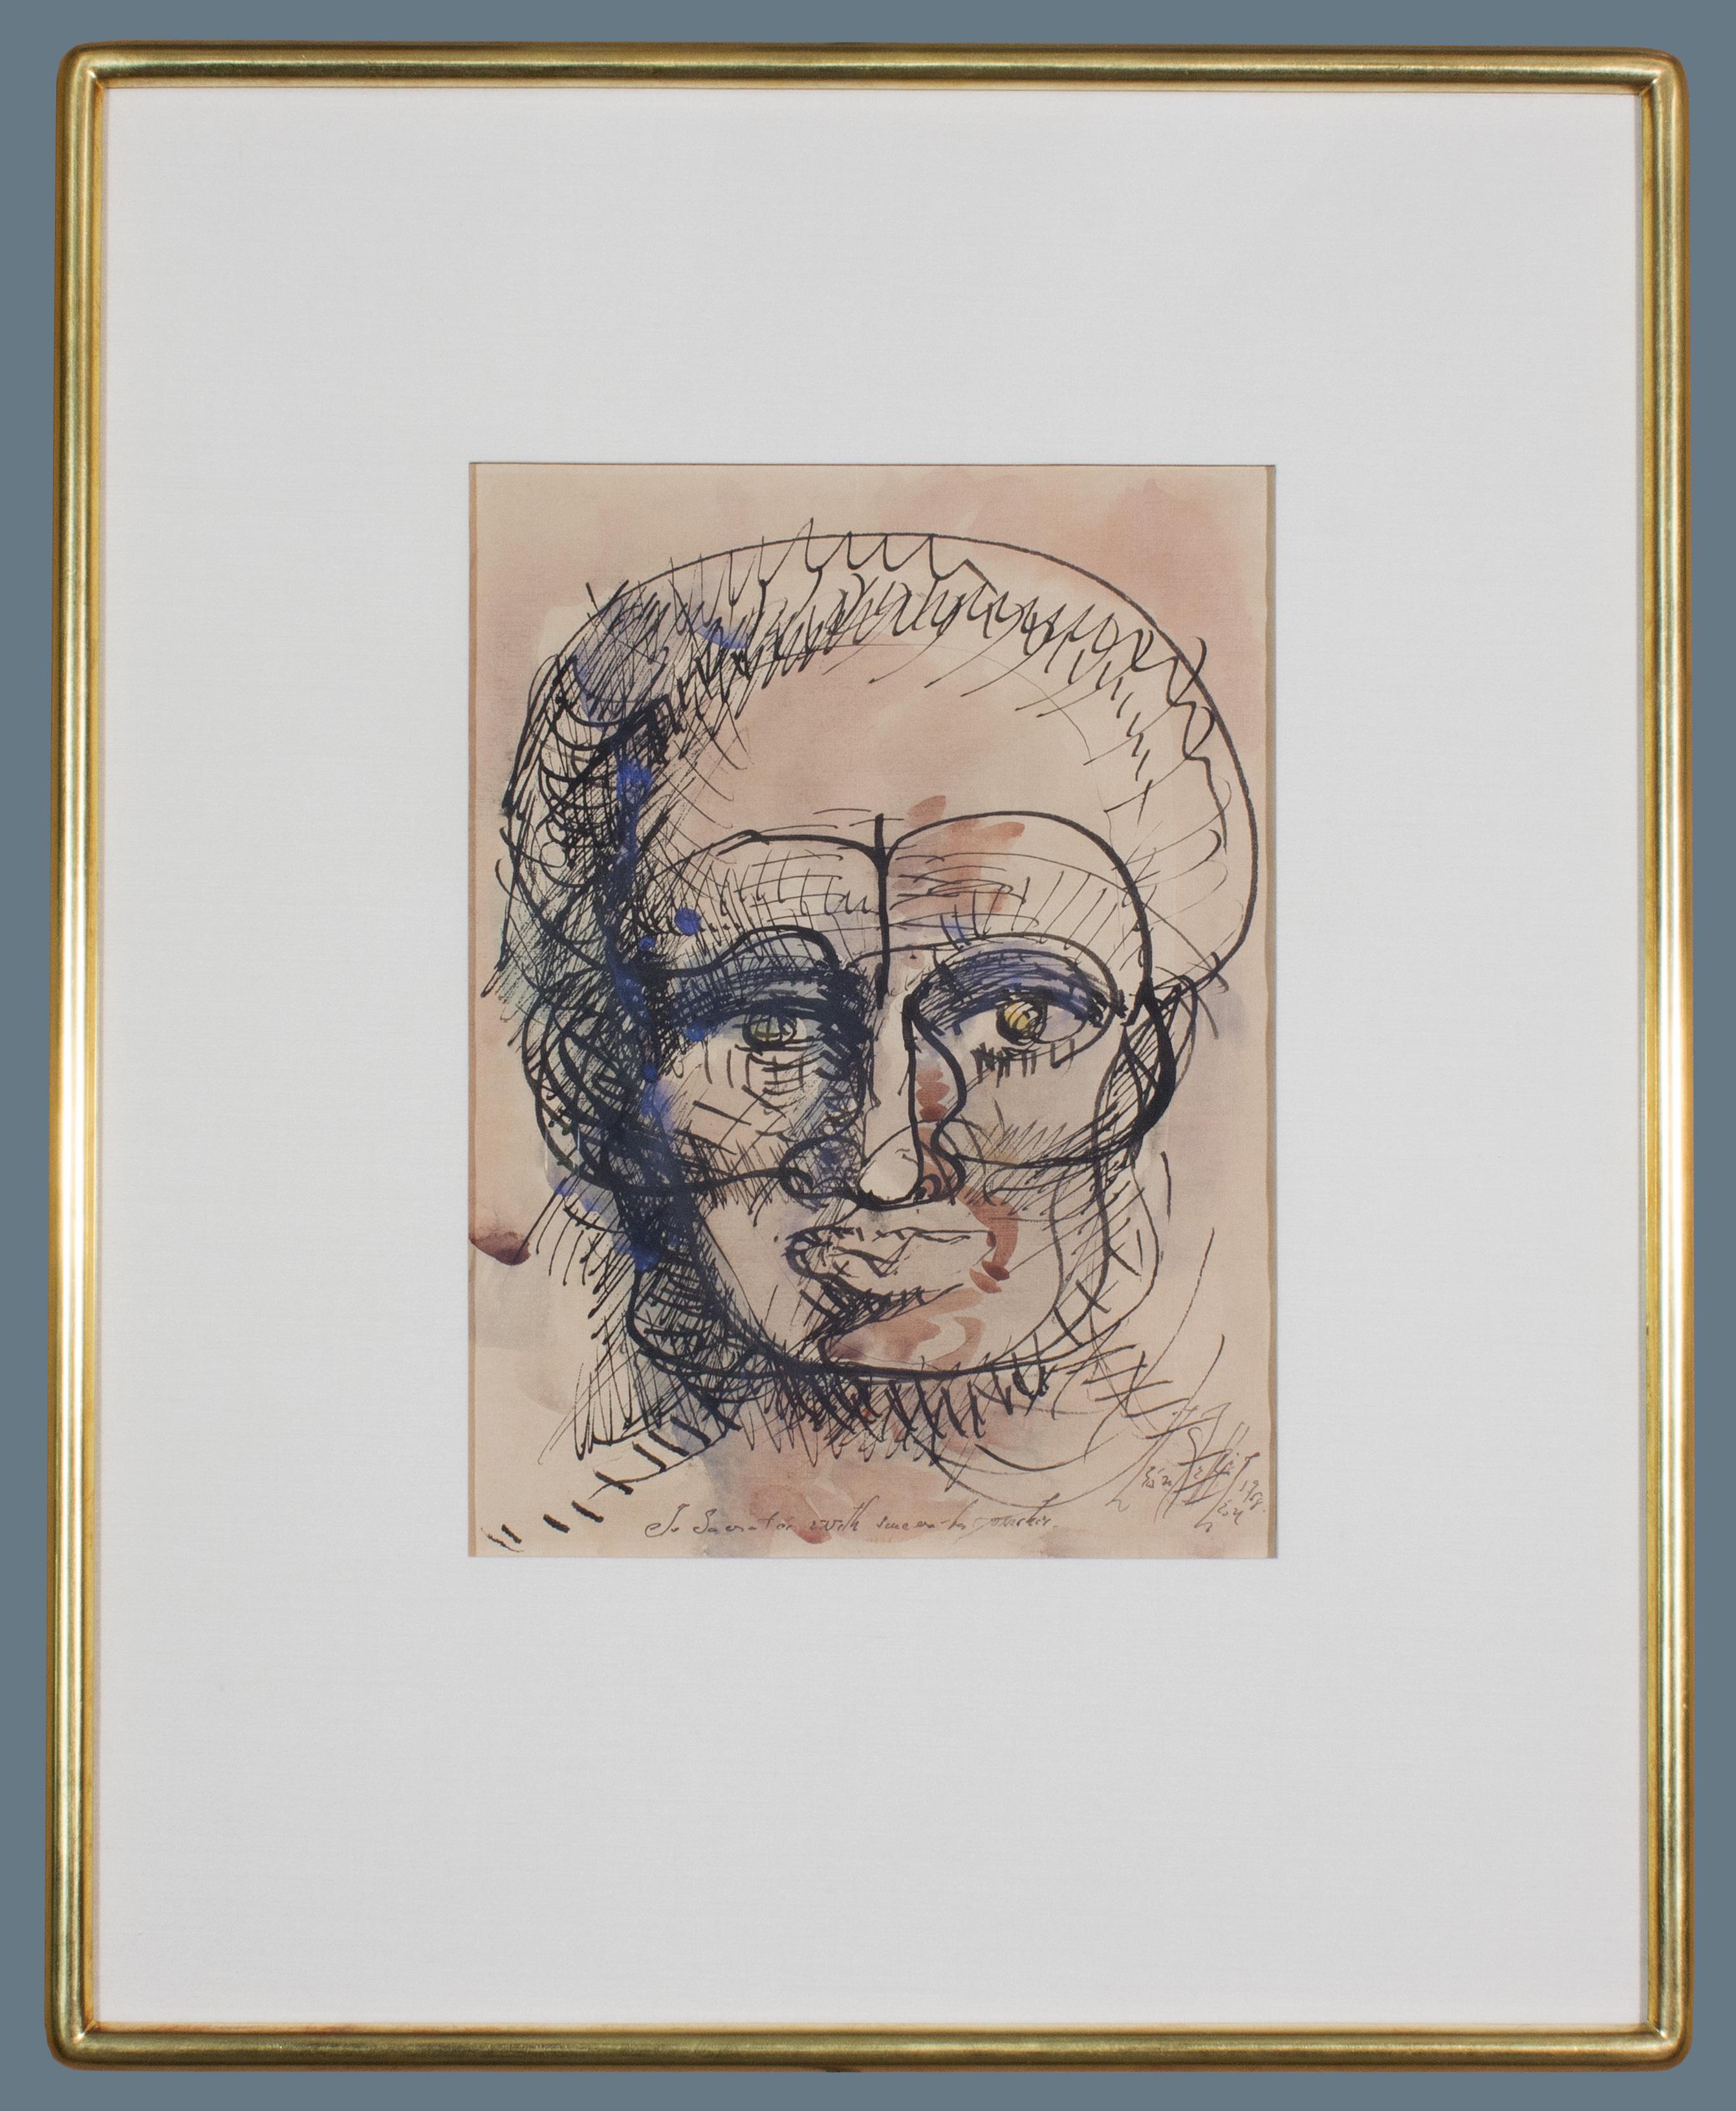 Leon Kelly
(American, born France, 1901-1982)
Surrealist Portrait

Ink on paper, 11 3/4 x 8 3/4 inches; Framed: 21 3/4 x 18 3/4 inches
Signed and dated at lower right: "Leon Kelly 1958"
Inscribed: "To Socrates with [love from Leon